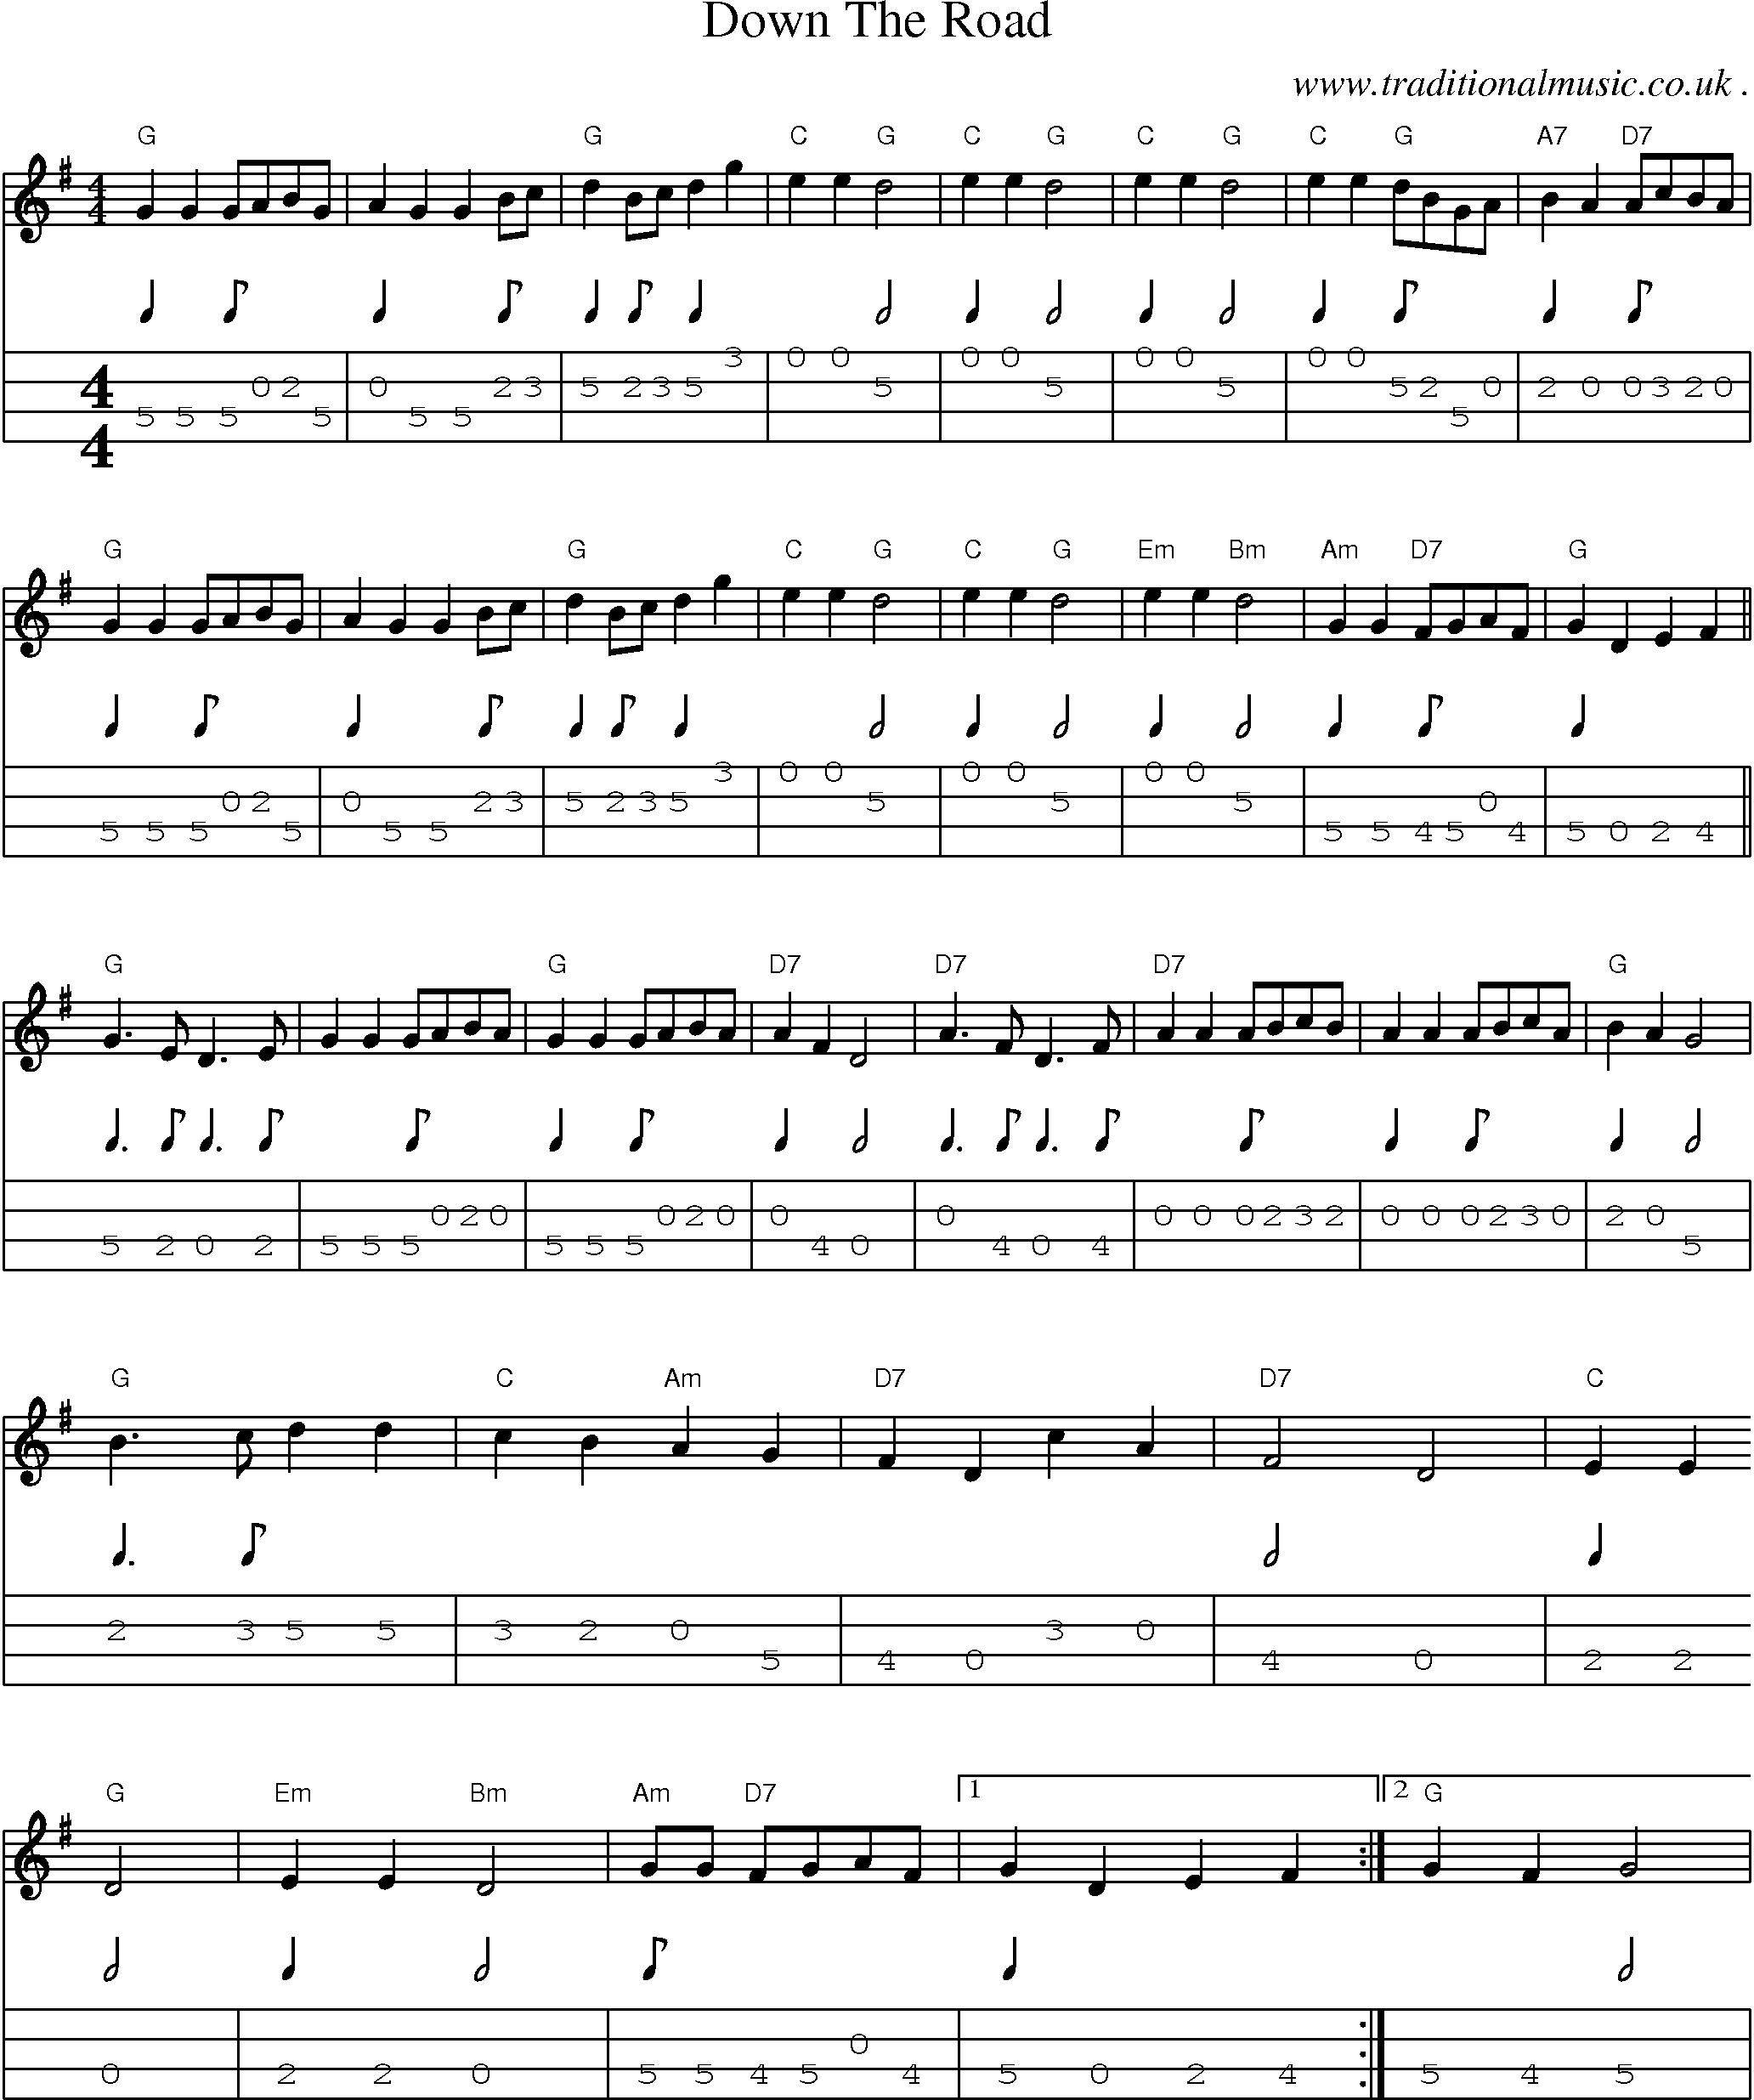 Sheet-music  score, Chords and Mandolin Tabs for Down The Road